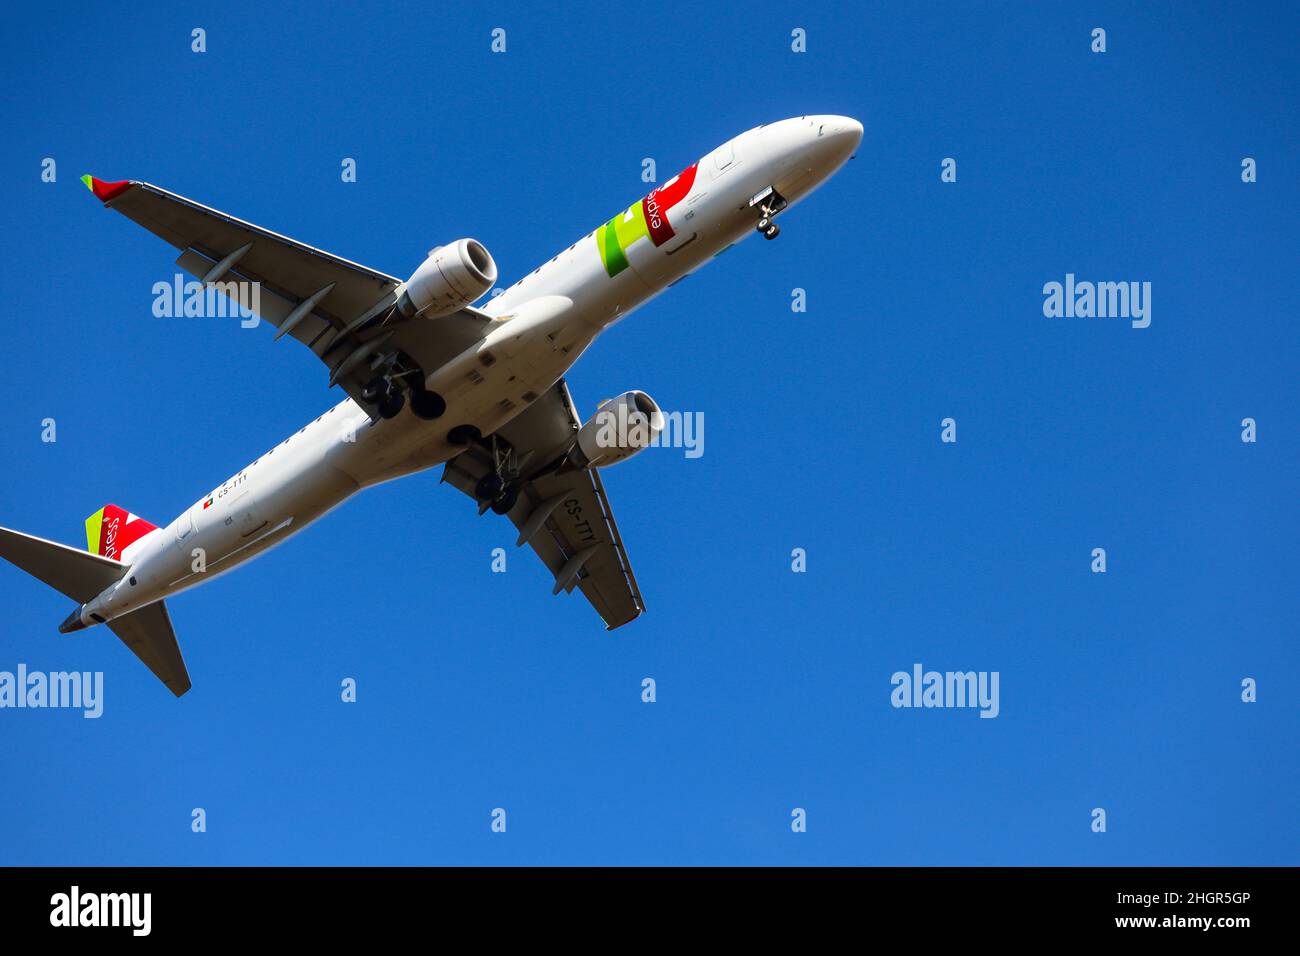 TAP Express regional airline, Portugal Stock Photo